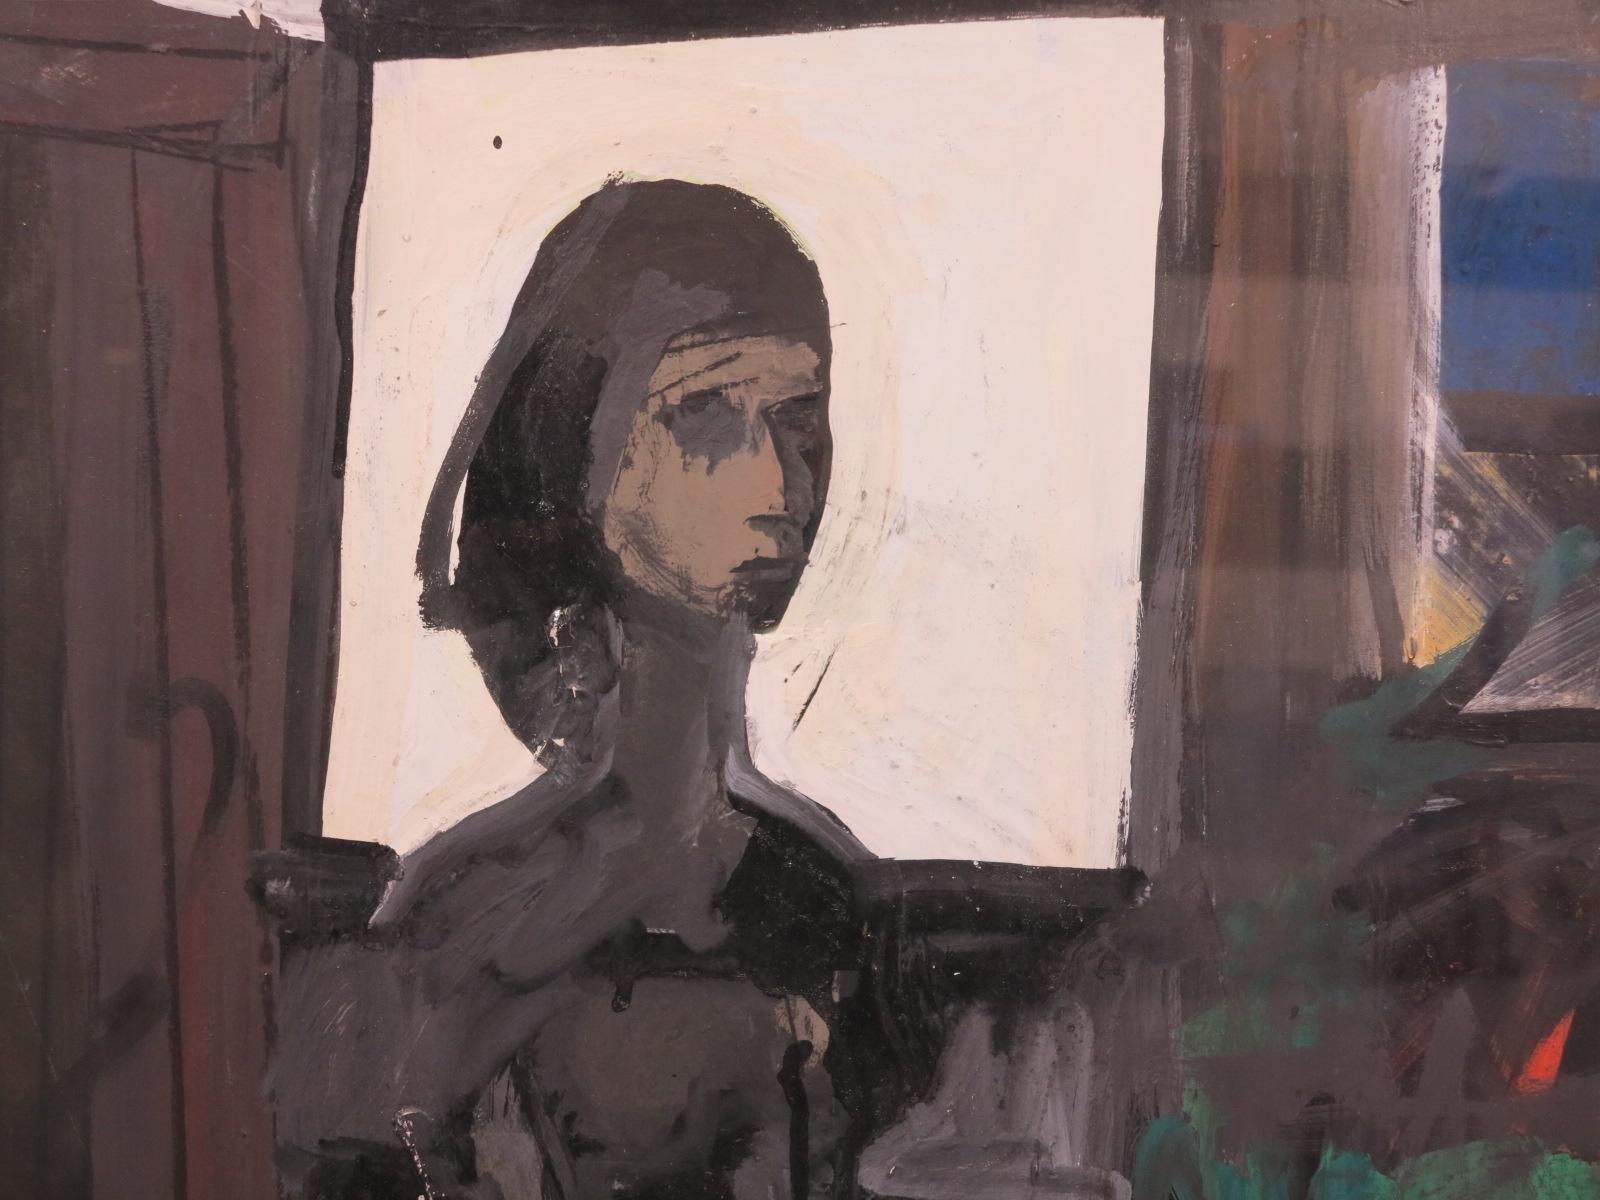 John Hultberg (1922-2005). Girl in Window, 1960. Gouache on illustration board measures 22 x 30 inches;  29.25 x 37.5 inches framed. Chestnut wood frame with beloved edge. Excellent condition with no damage or conservation. Signed and daed lower